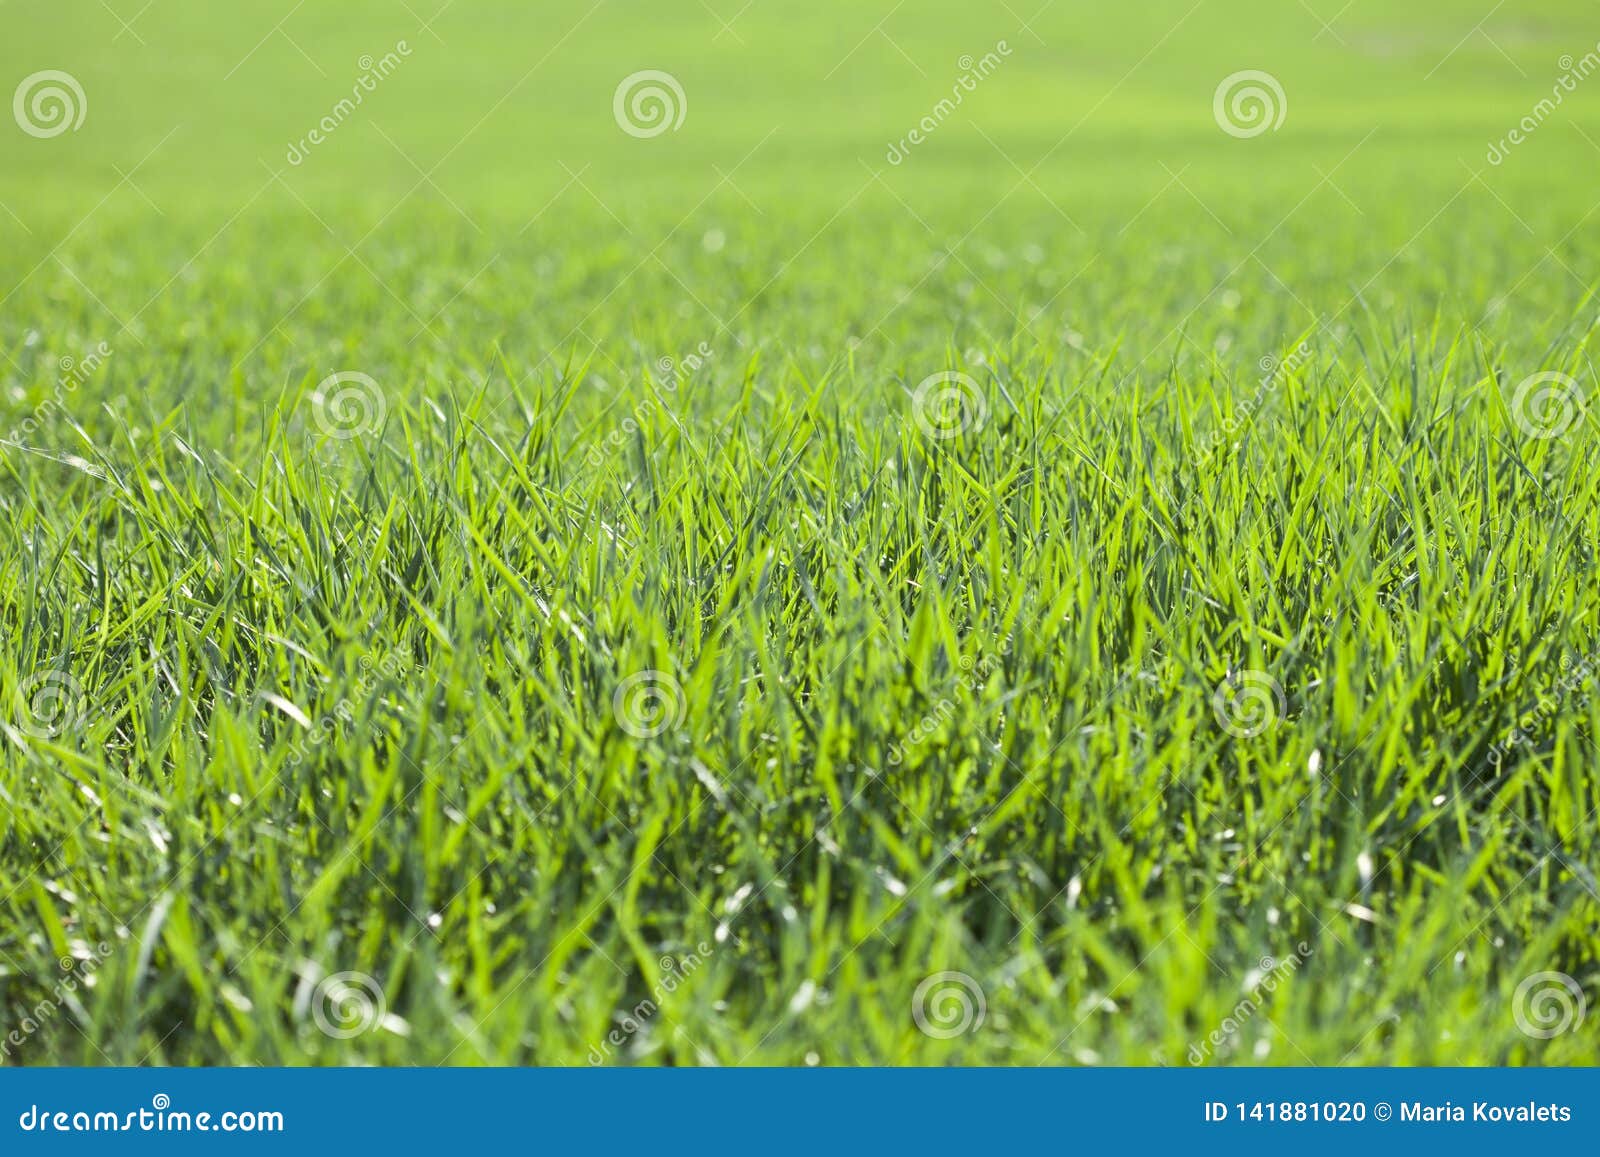 Field of green grass stock photo. Image of clouds, macro - 141881020